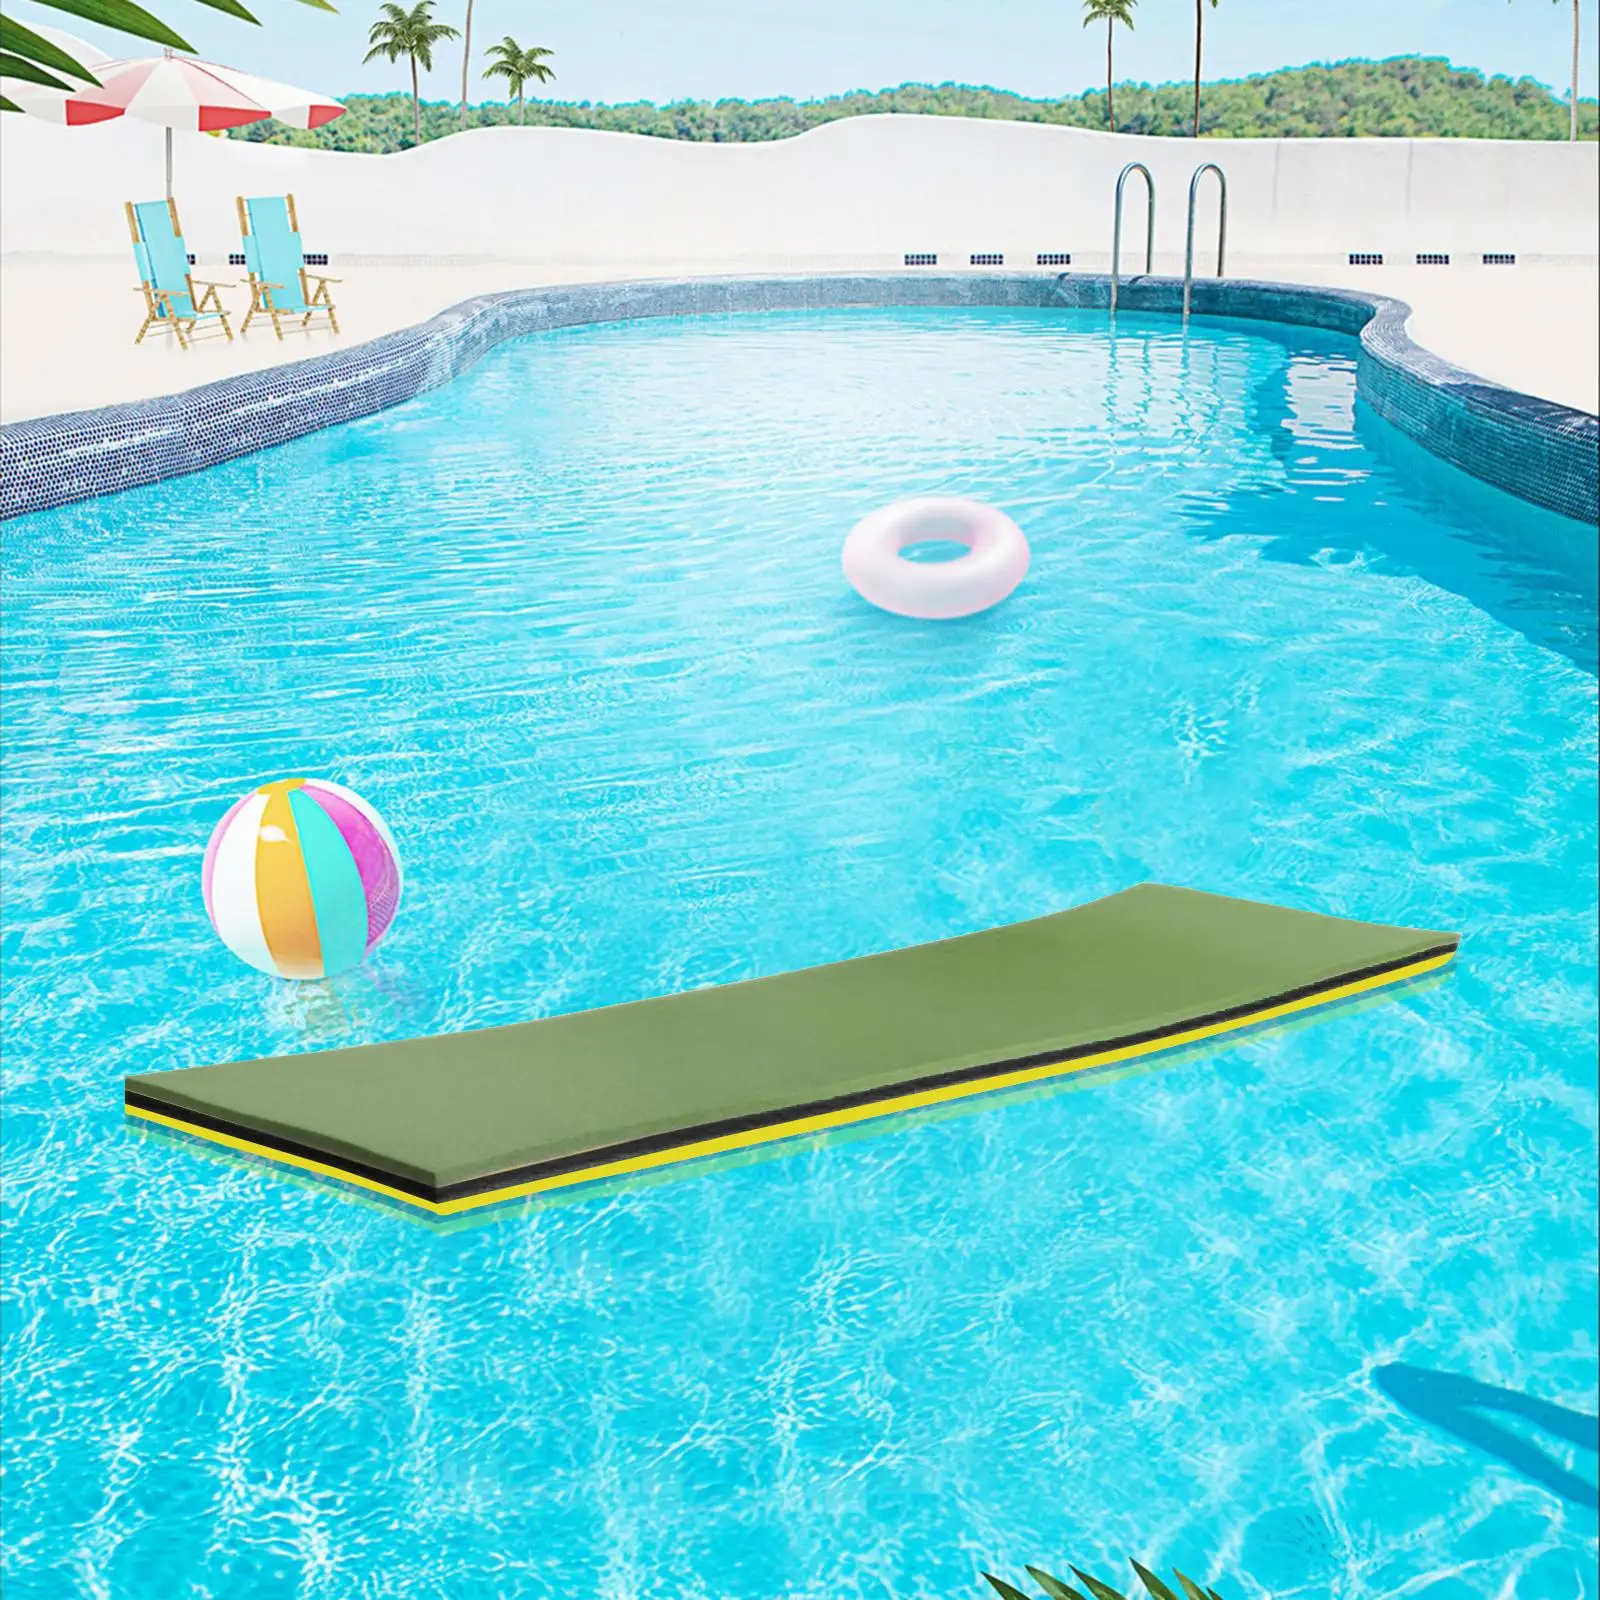 Floating Mat Water Pad Cushion 43x15.7x1.3inch Having Fun on The Water Sturdy for Playing, Relaxing, Recreation Roll up Pad